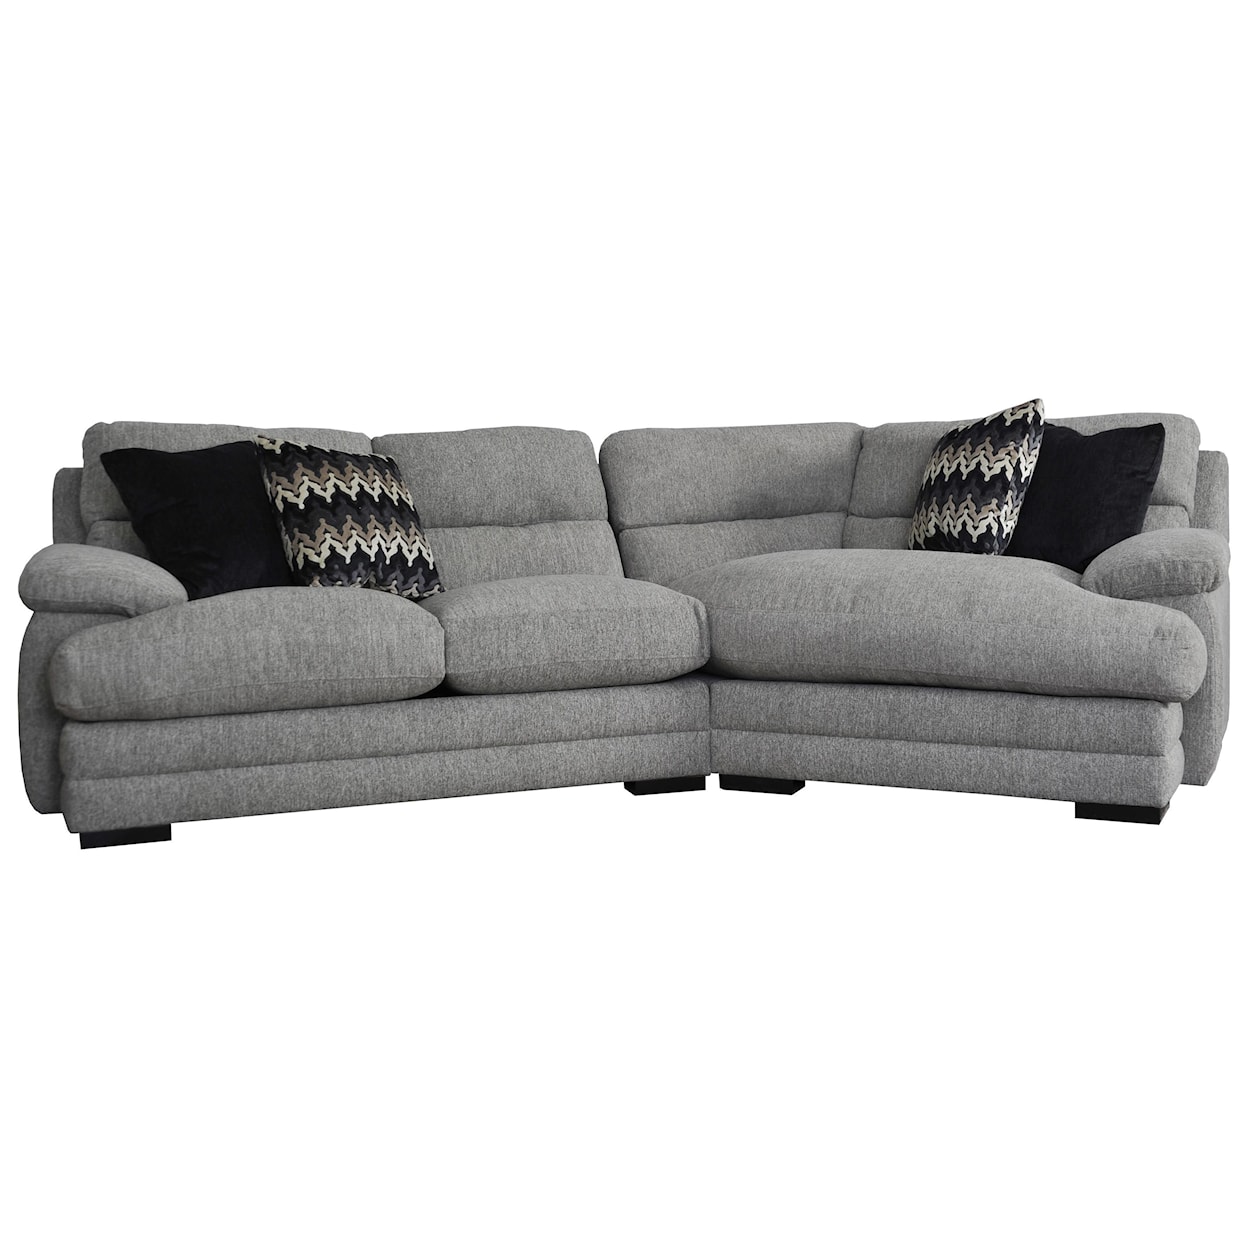 Sunset Home 20038 2 Pc Sectional Sofa